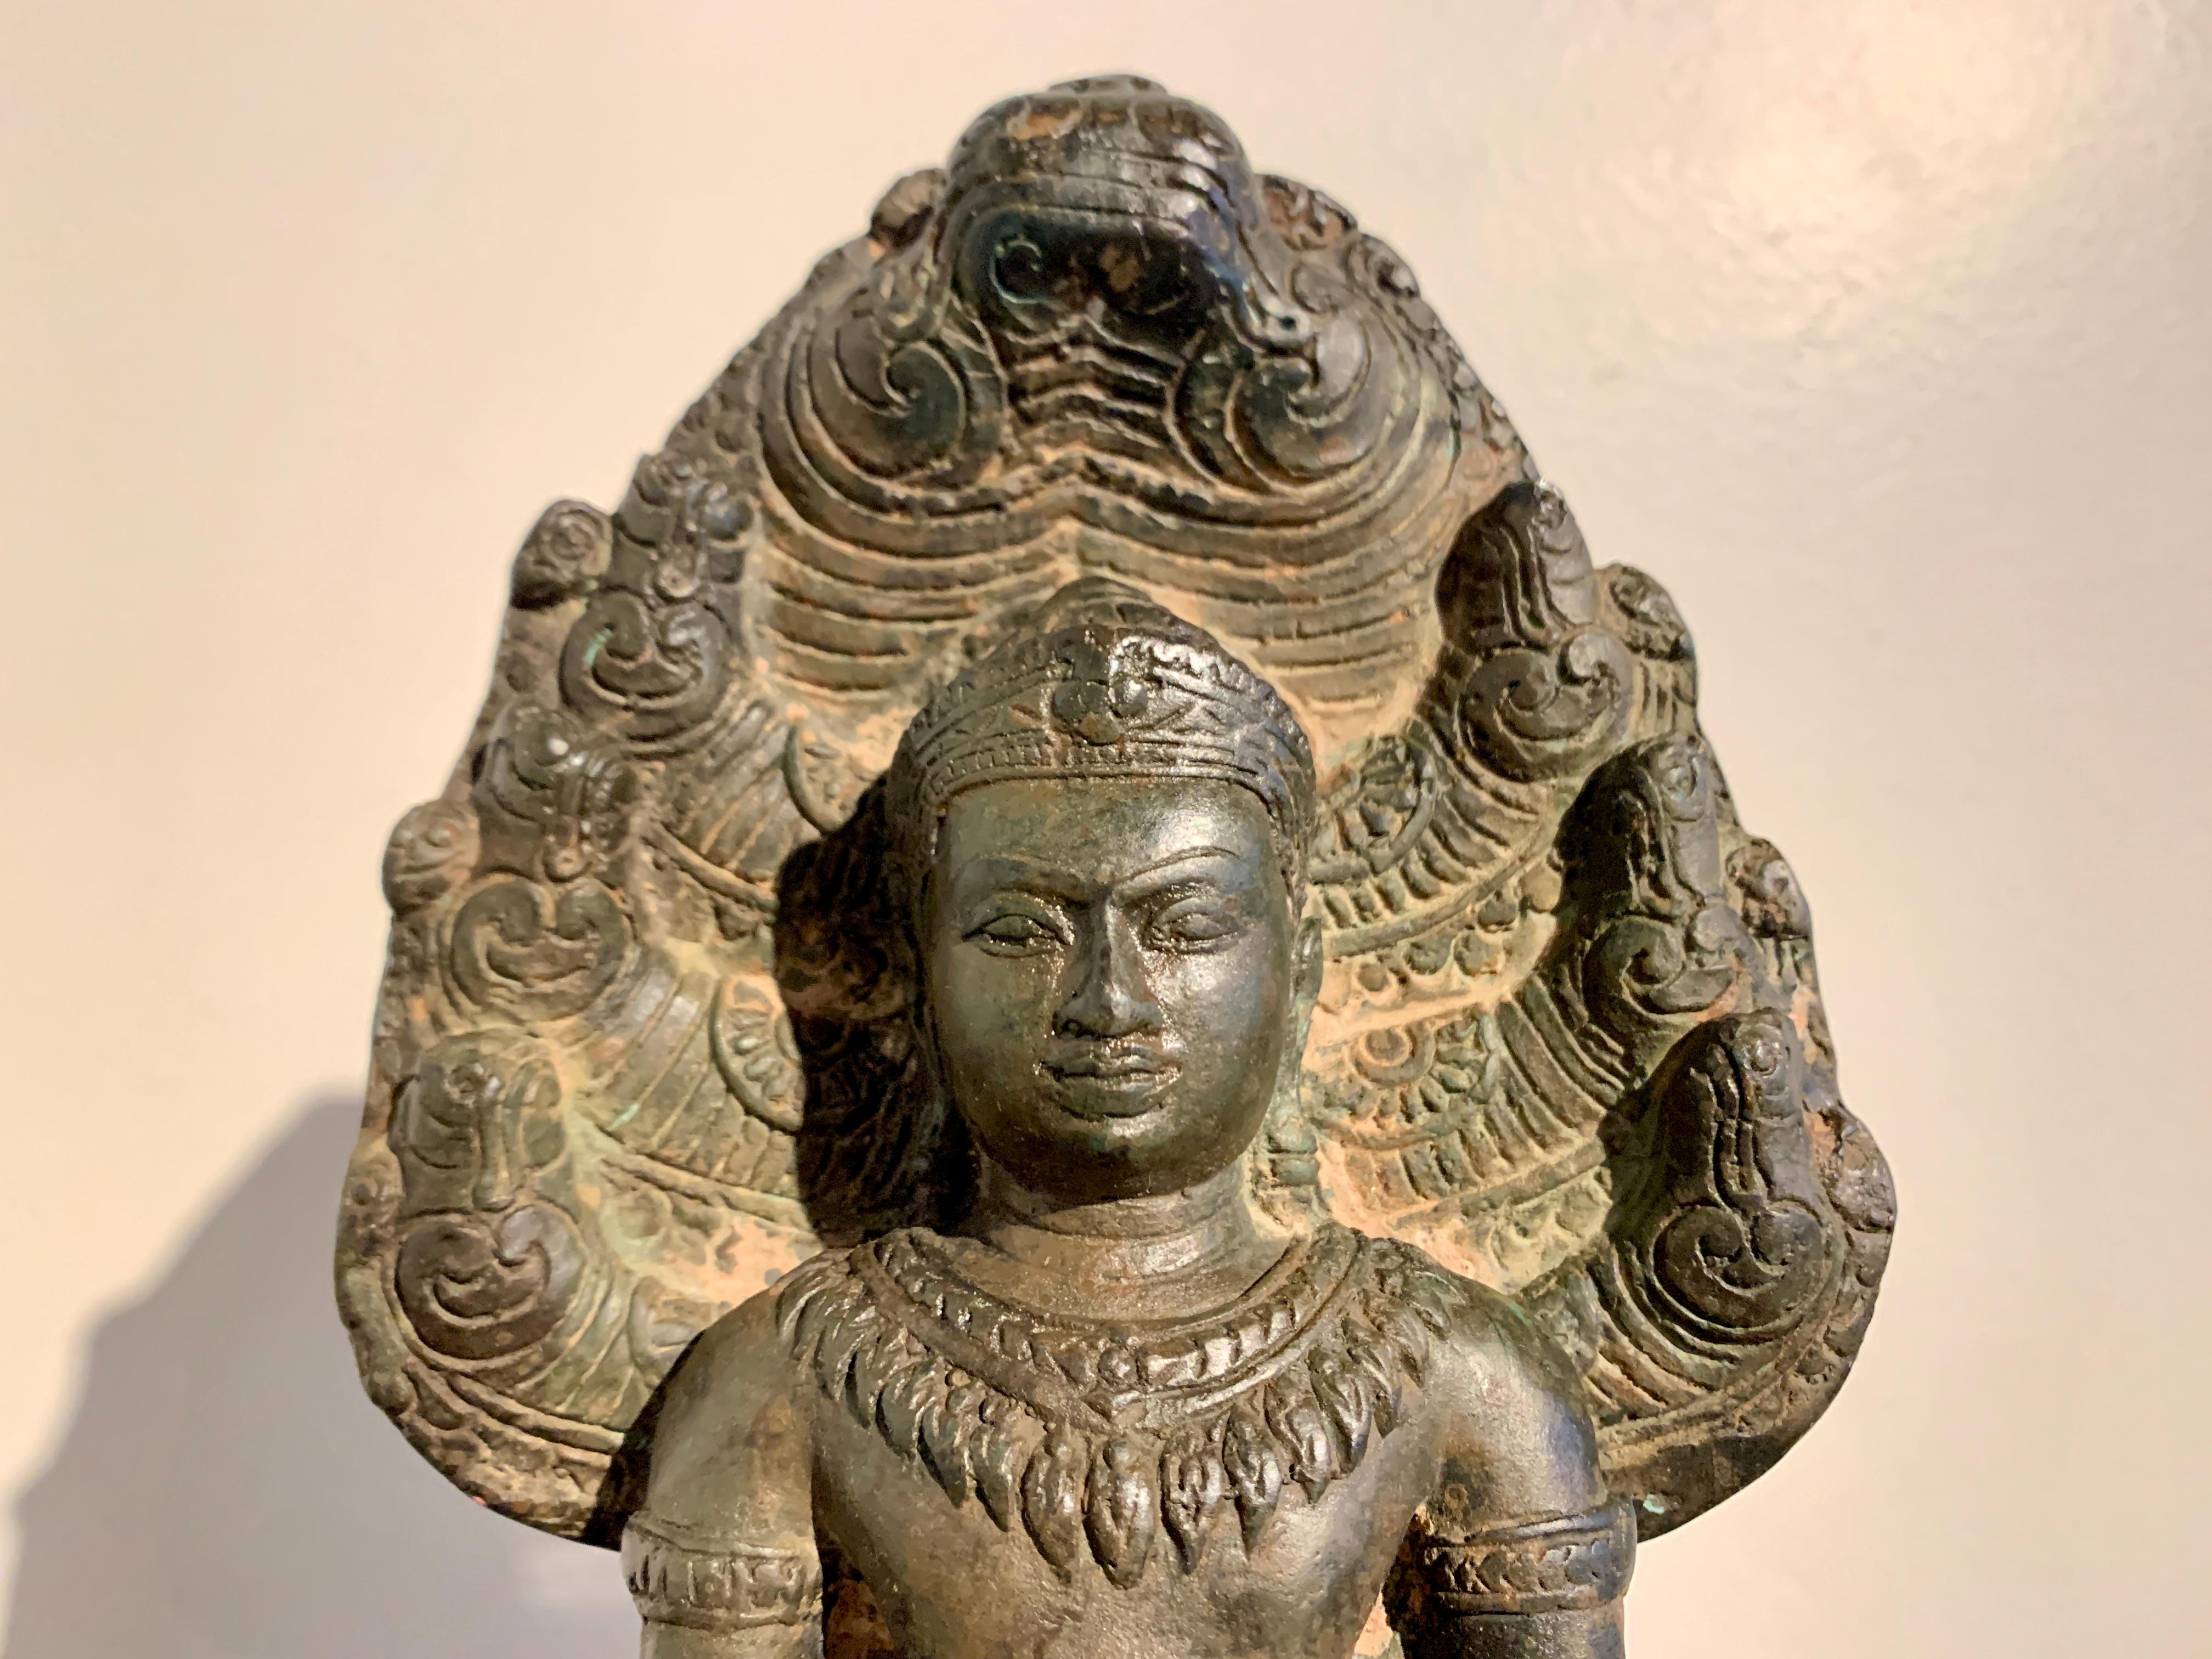 A well cast Khmer style bronze figure of an adorned Buddha sheltered by a Naga, Buddha Muchalinda, 19th century or earlier, Cambodia.

The sculpture in the Khmer style and following the conventional form known as Buddha Muchalinda, with the Buddha